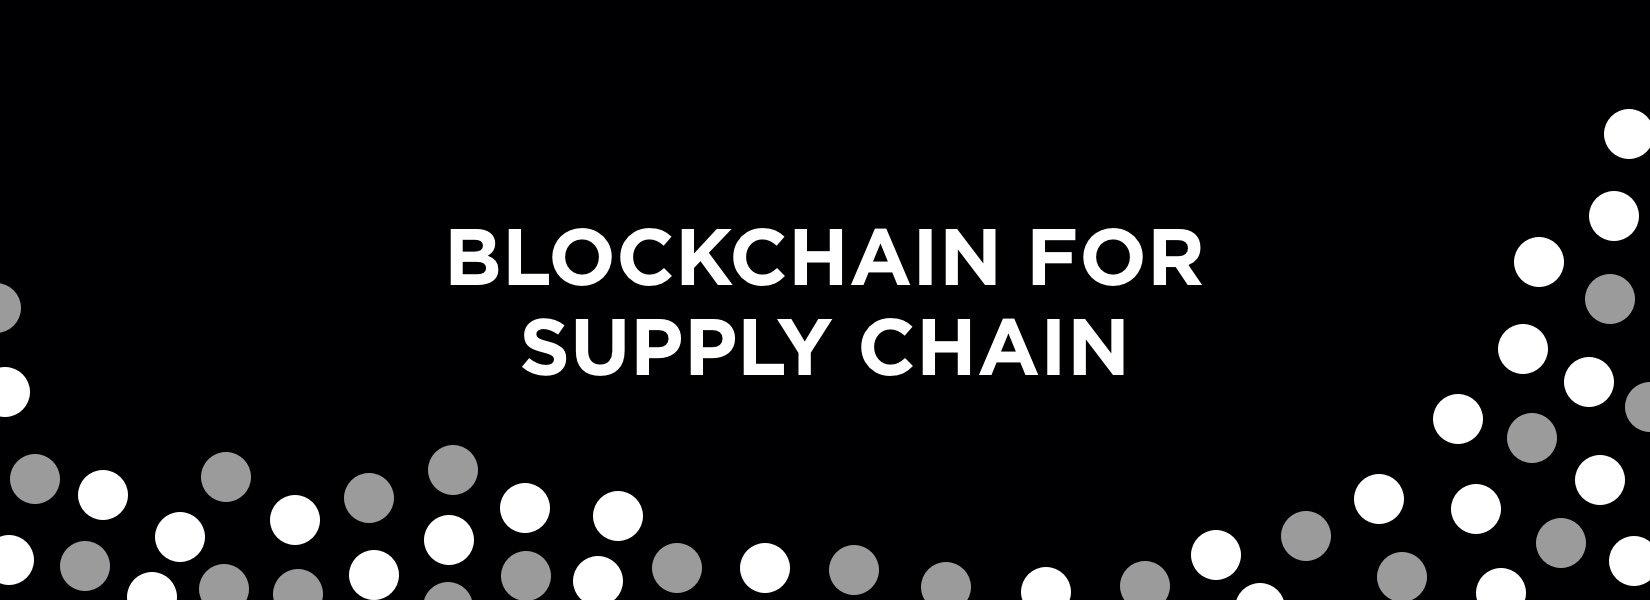 Do you need blockchain in your supply chain?